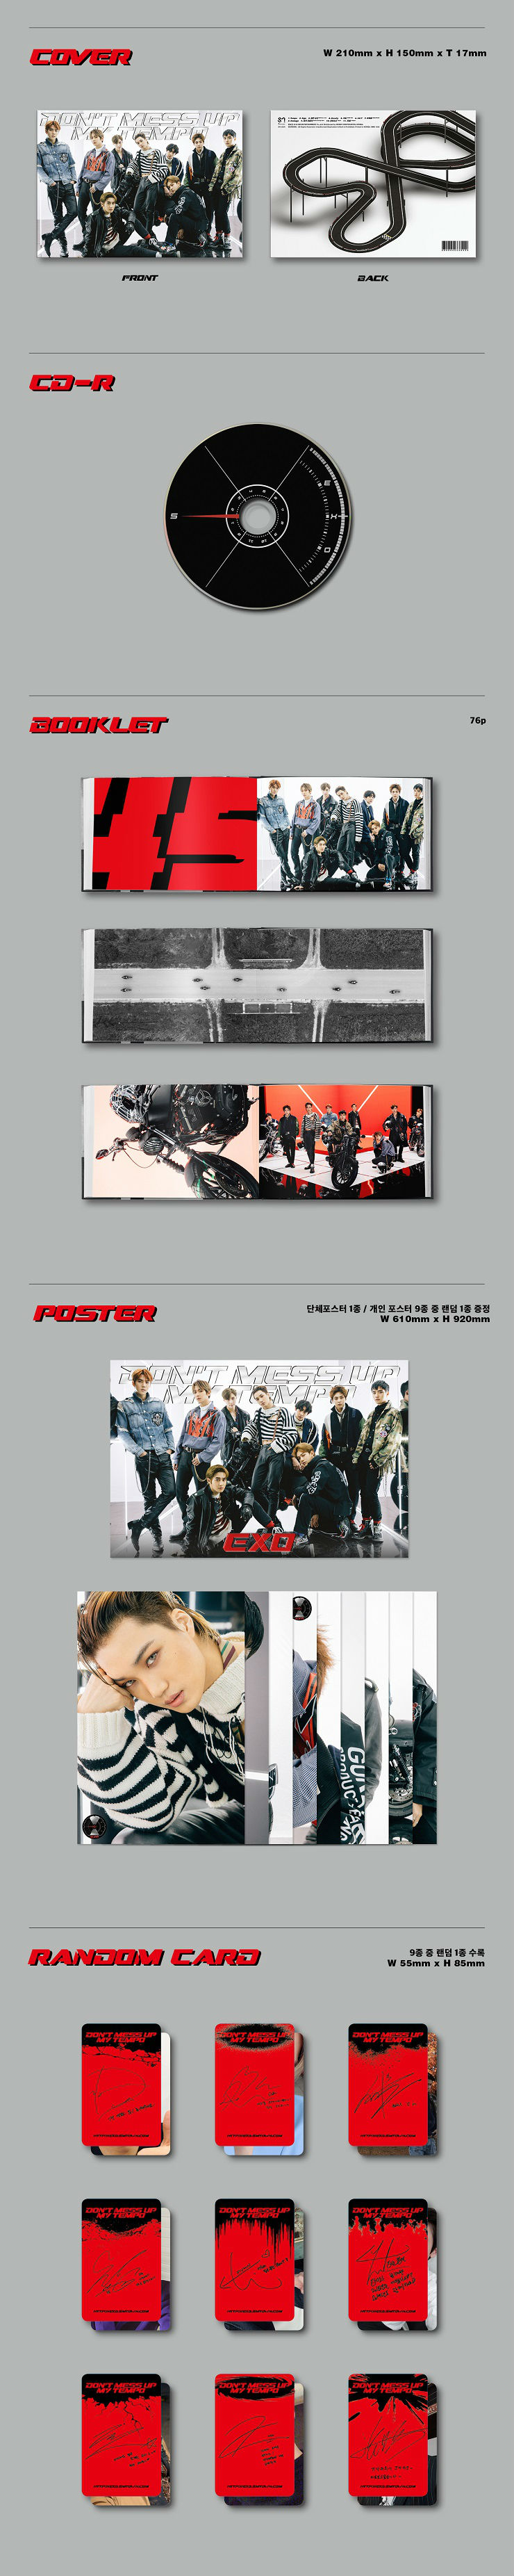 EXO(엑소) - 5집 DON'T MESS UP MY TEMPO [Vivace Ver.]